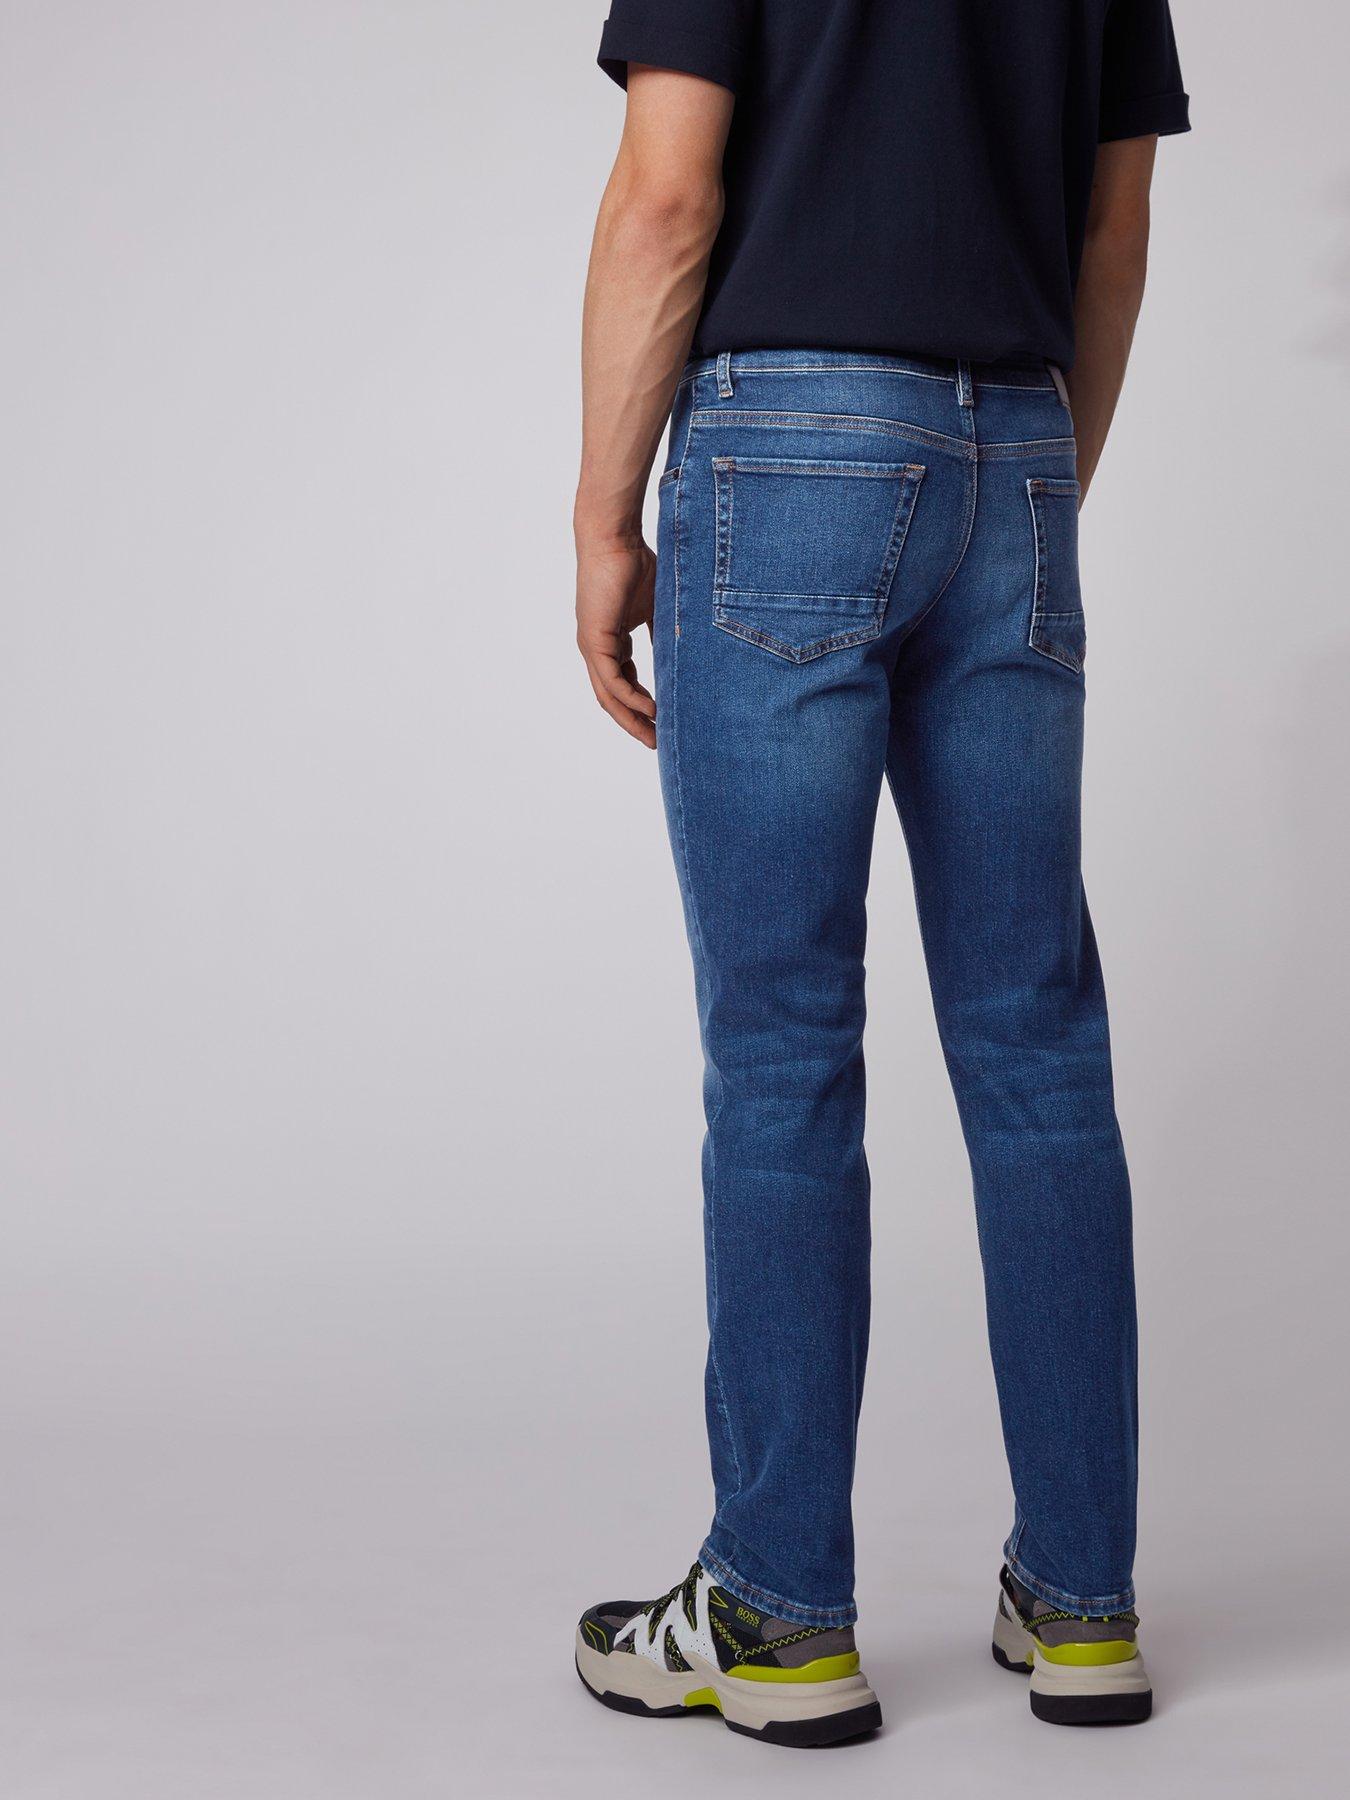 relaxed fit jeans uk